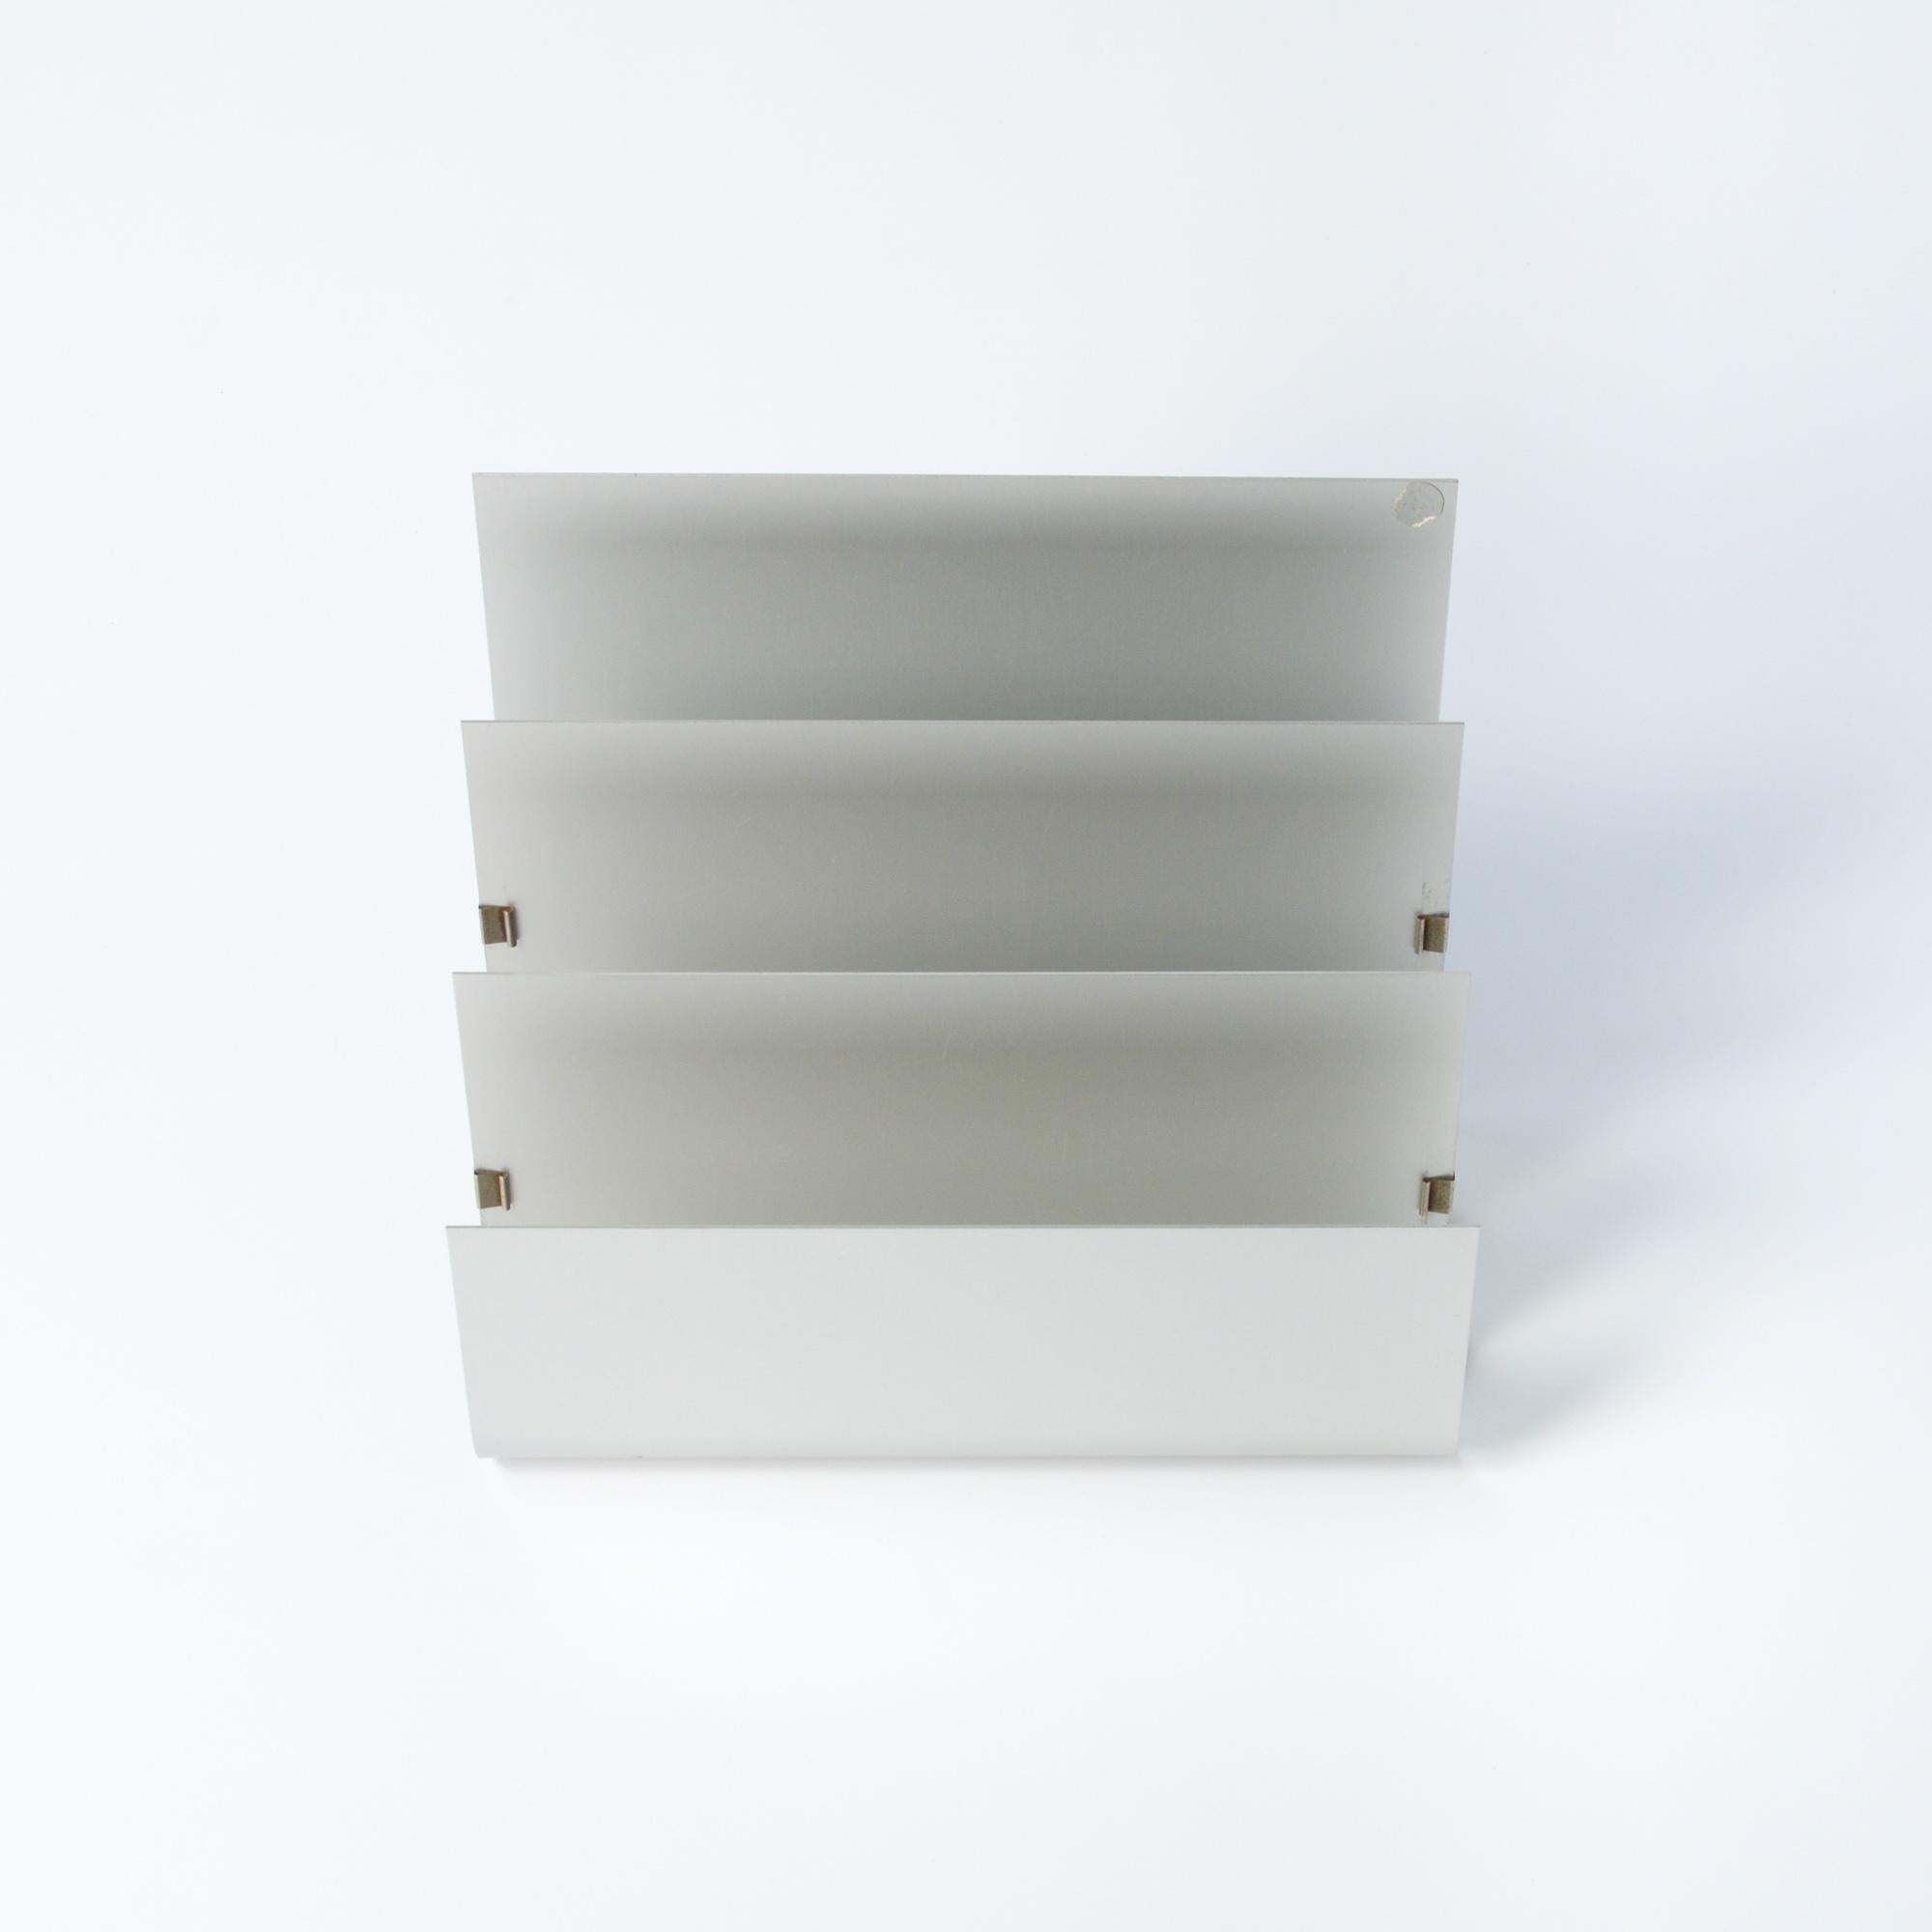 This aluminum magazine rack was designed by Pierre Vandel for Espace Pierre Cardin in the 1970s.
It is made of 3 pieces in aluminum.
The magazine rack is in good vintage condition.